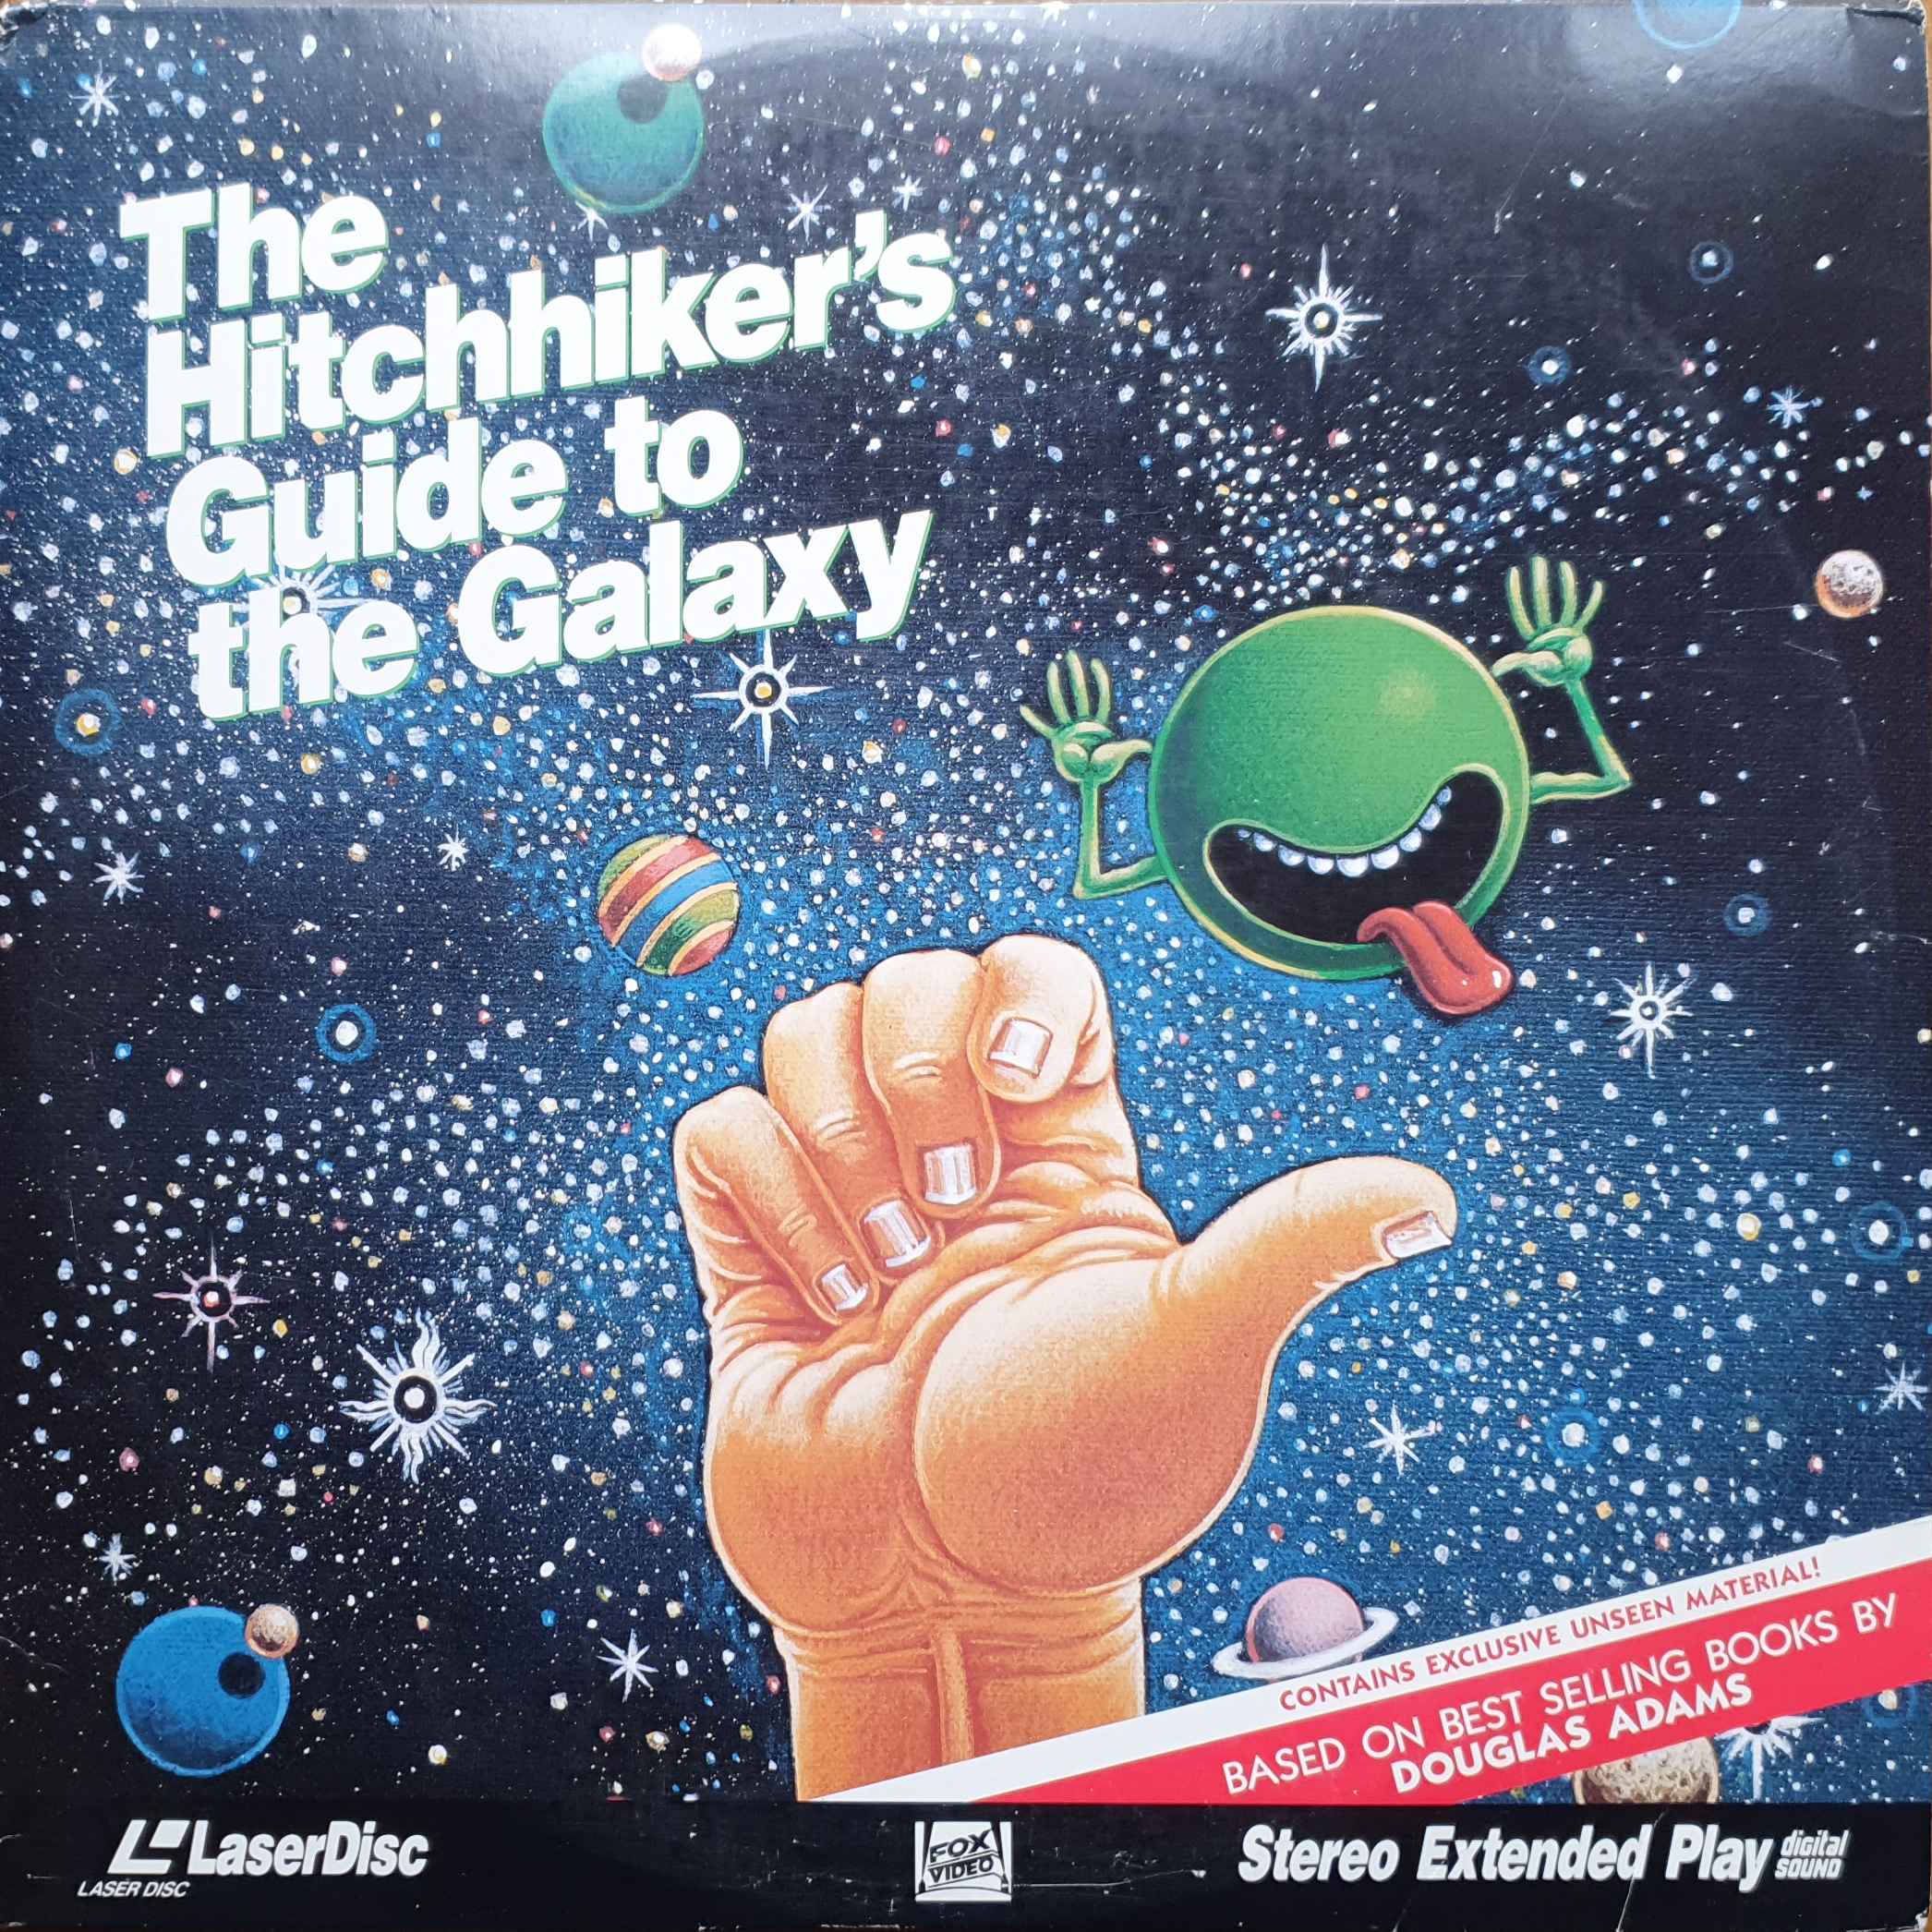 Picture of 5799 - 80 The hitch-hiker's guide to the galaxy by artist Douglas Adams from the BBC anything_else - Records and Tapes library